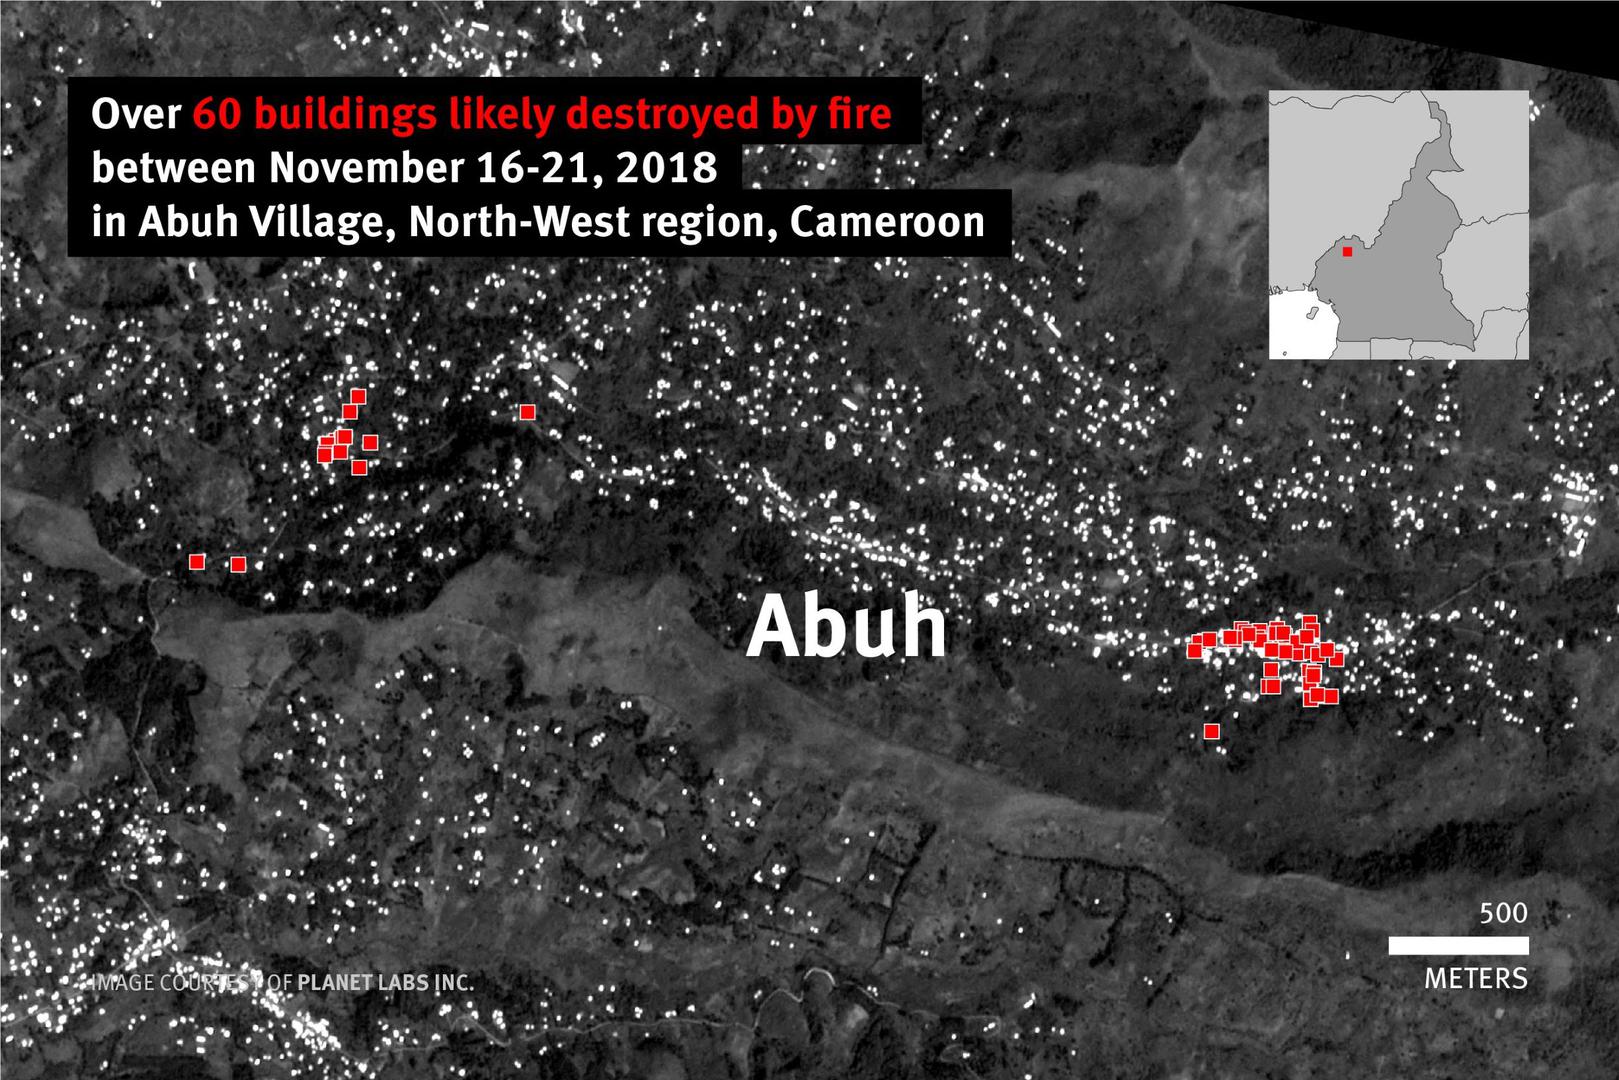 Over 60 buildings likely destroyed by fire between November 16-21,2018 in Abuh Village, North West region, Cameroon